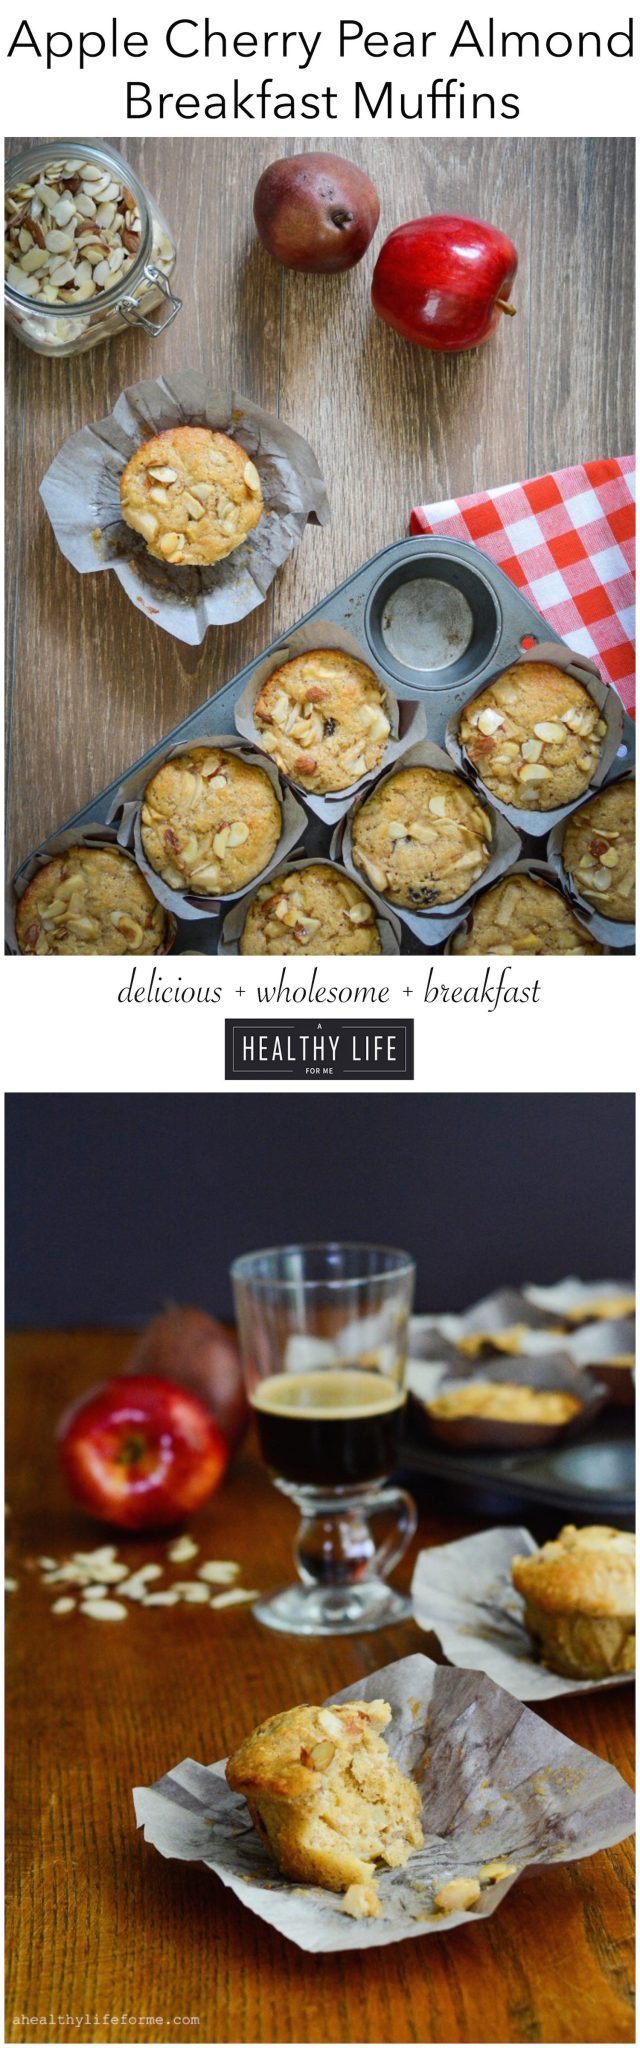 Apple Cherry Pear Almond Breakfast Muffin Recipe Delicious Wholesome Satisfying | ahealthylifeforme.com